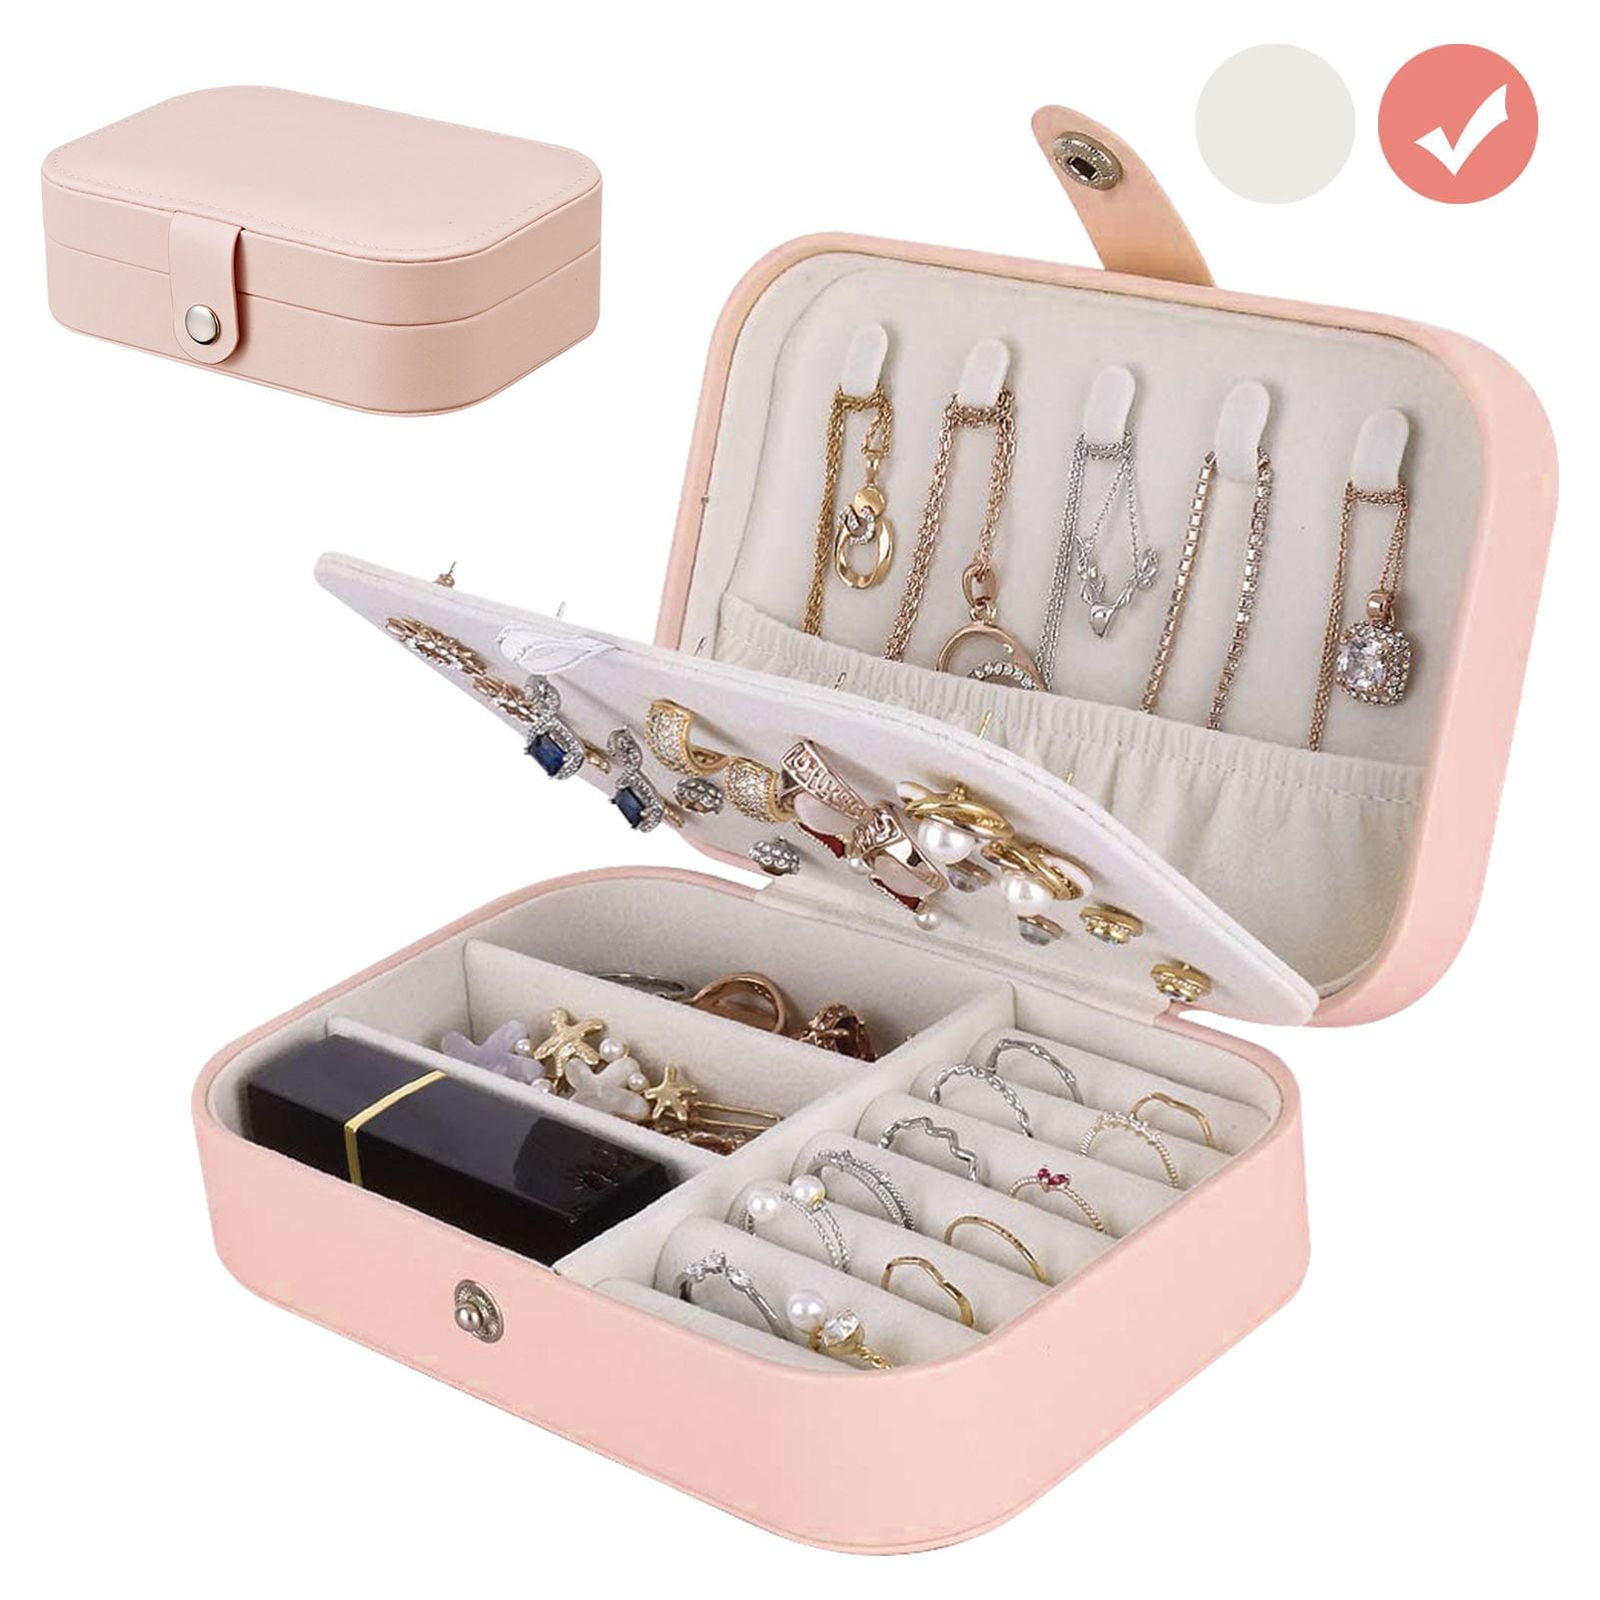 Ivory Double Layer Travel Jewelry Box with Necklace Storage, Ring Storage,  and Mirror - ACC088B